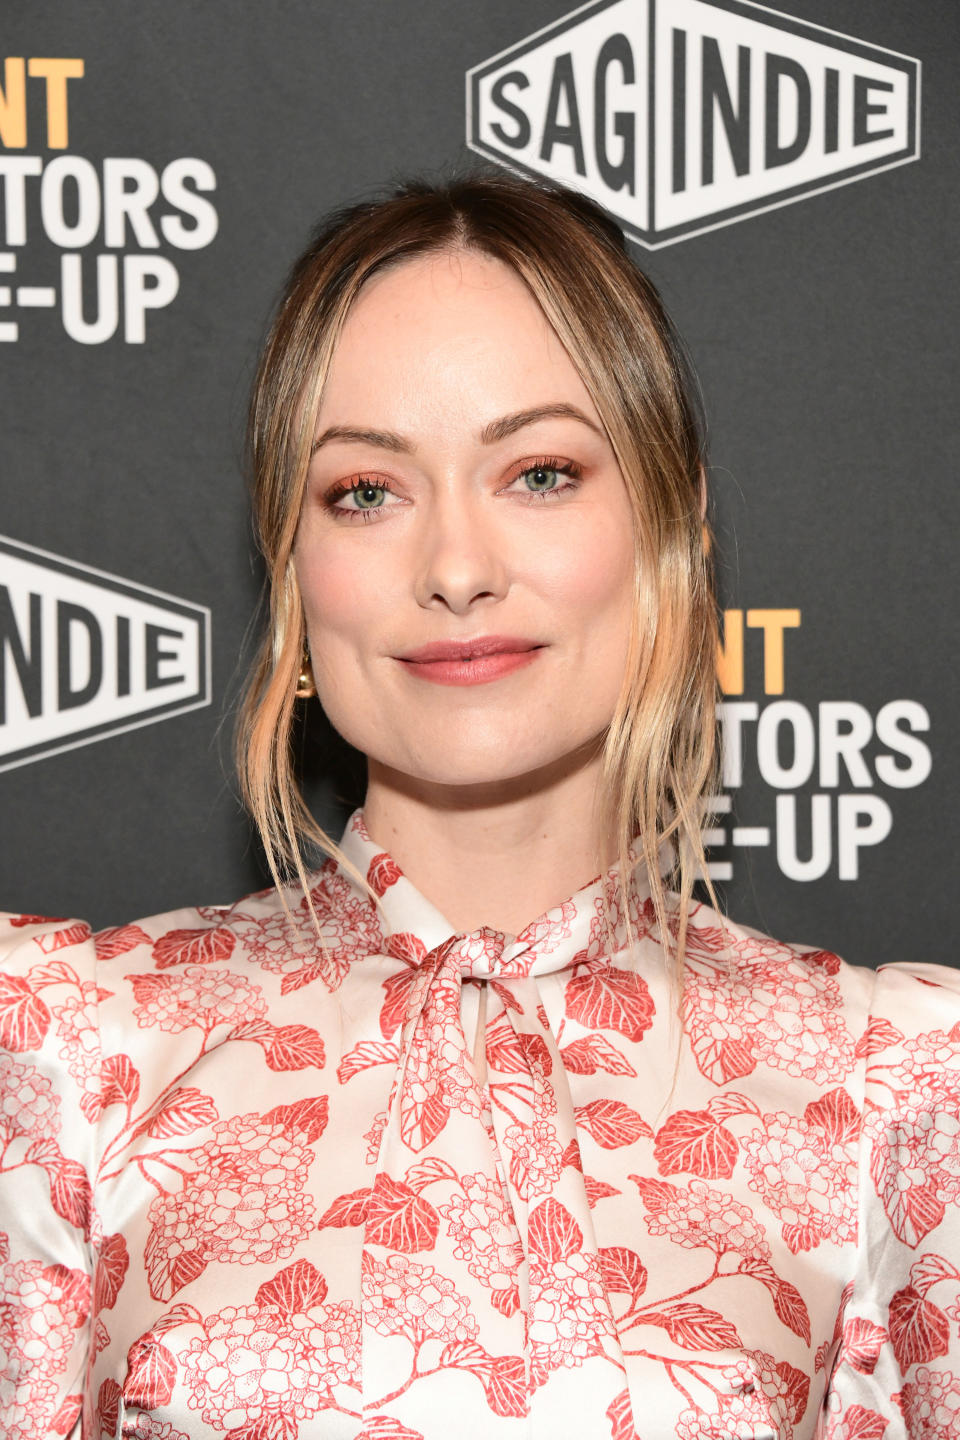 Olivia Wilde attends Film Independent's Directors Close Up: Night 4 at the Landmark Theater on February 05, 2020 in Los Angeles, California